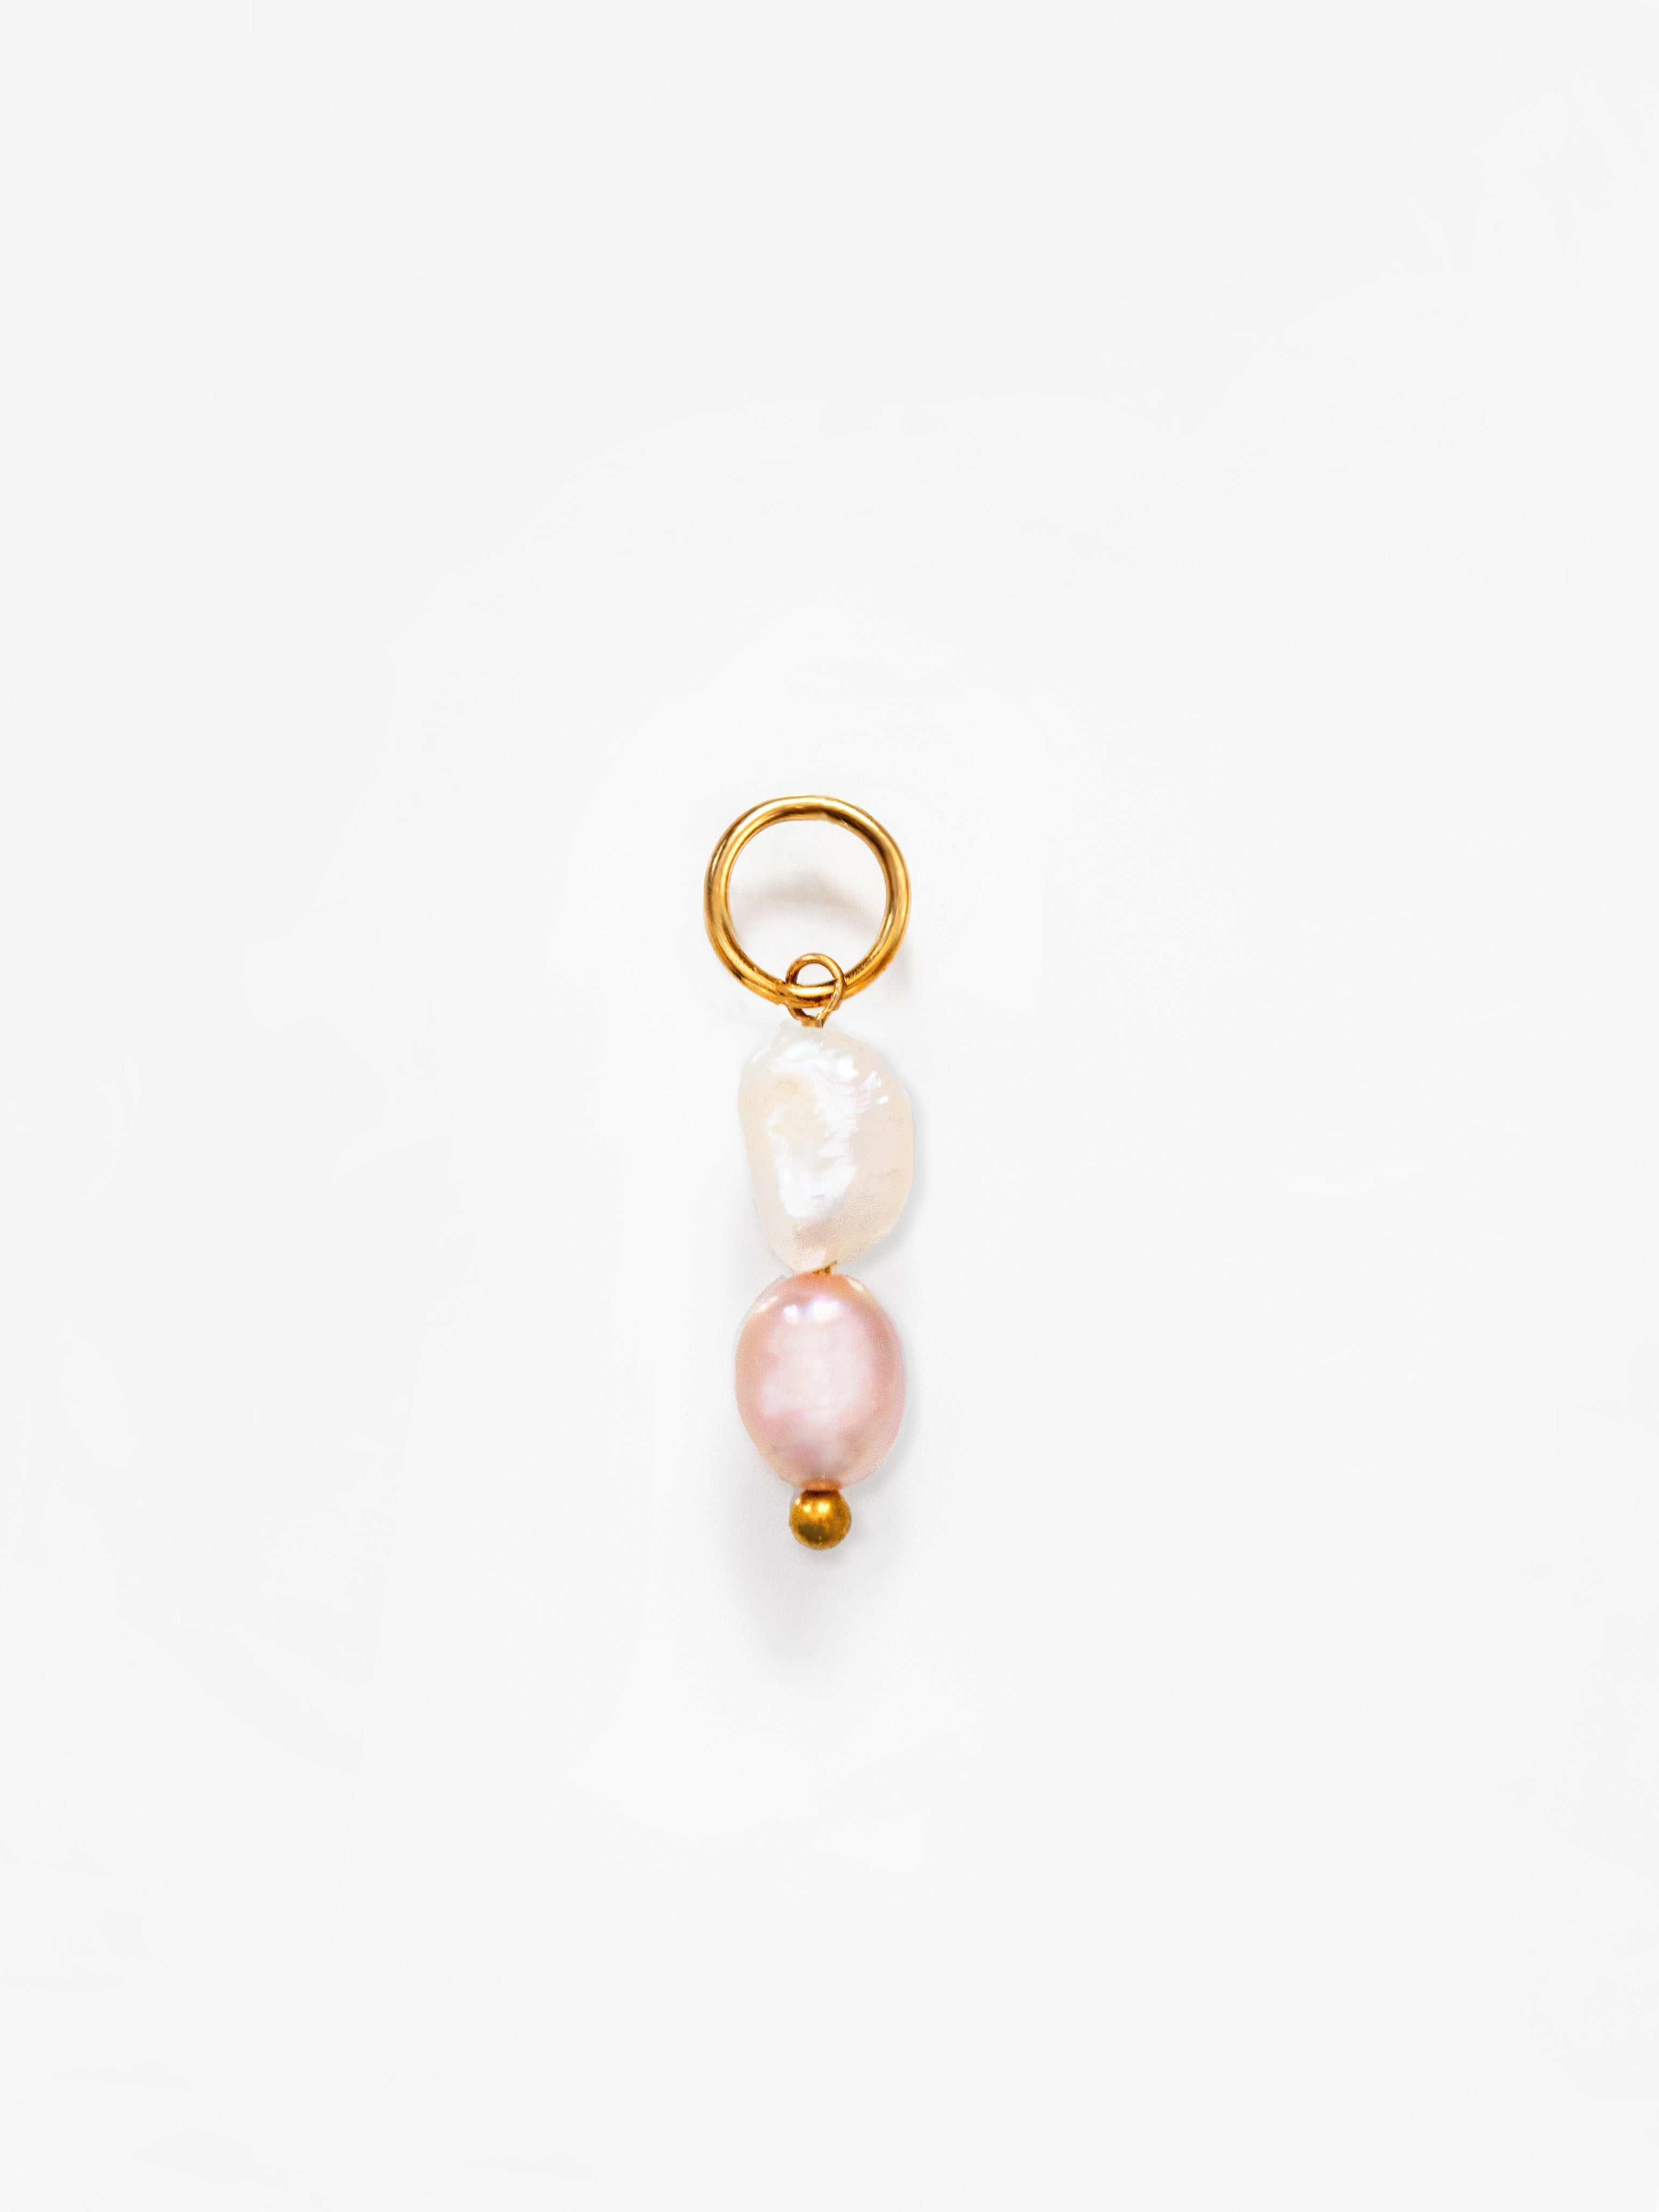 Gold Pastel Pink And White Pearl Pendant / Charm